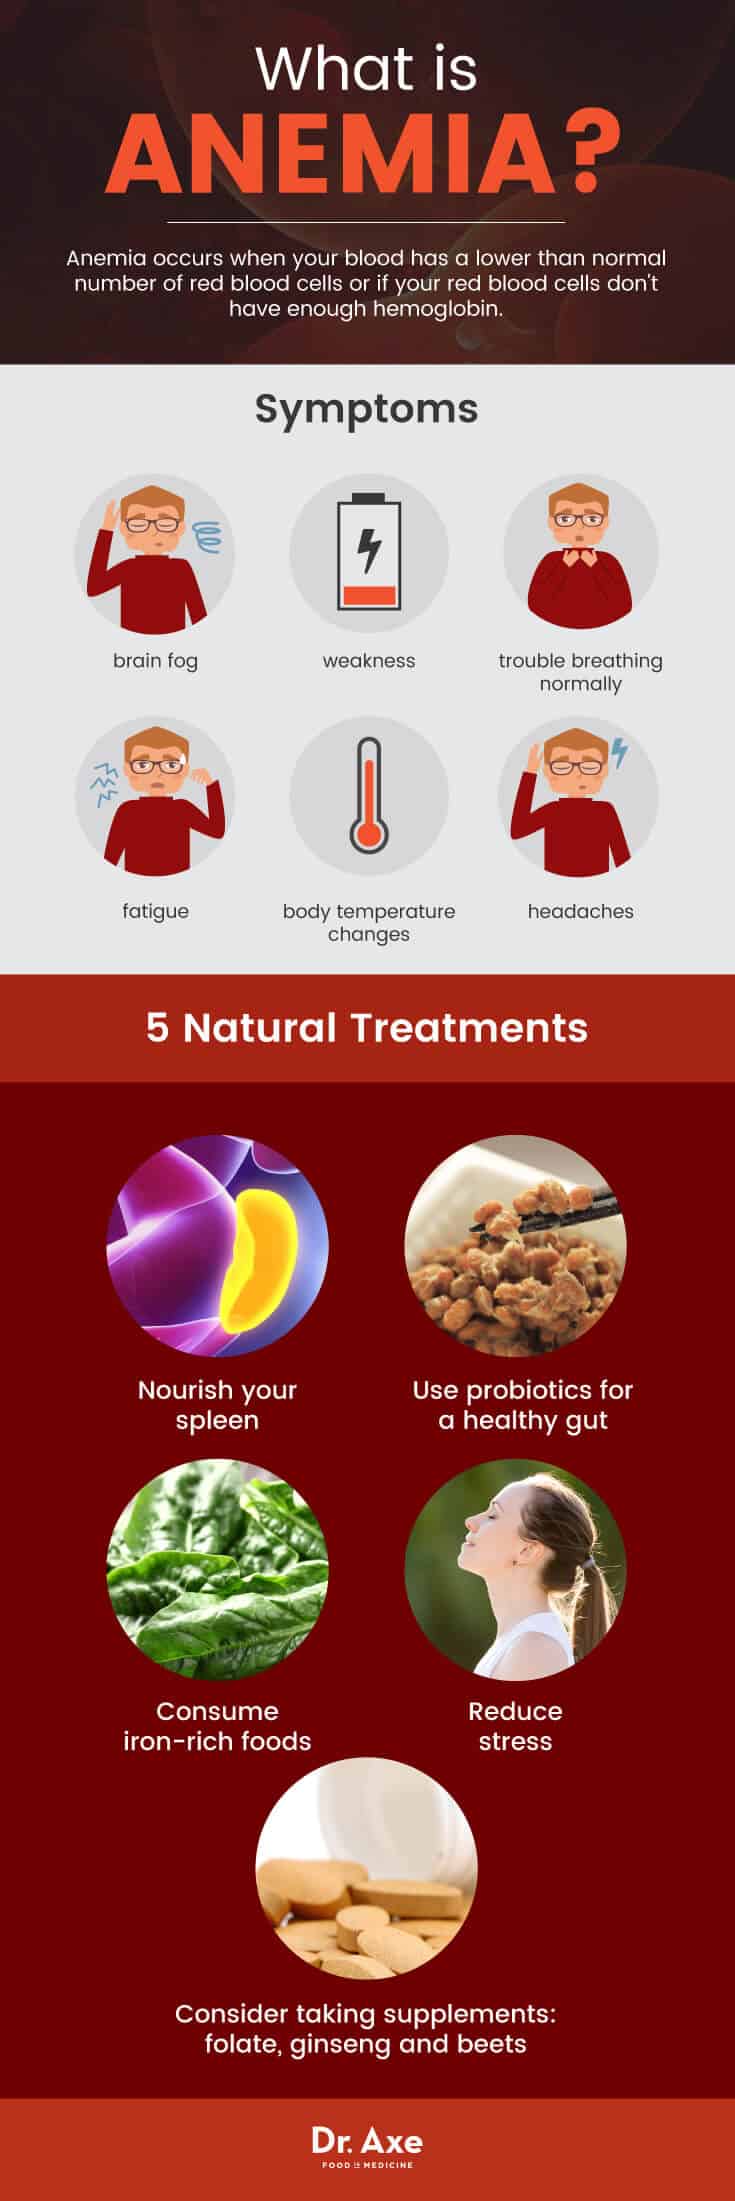 What is anemia + natural treatments